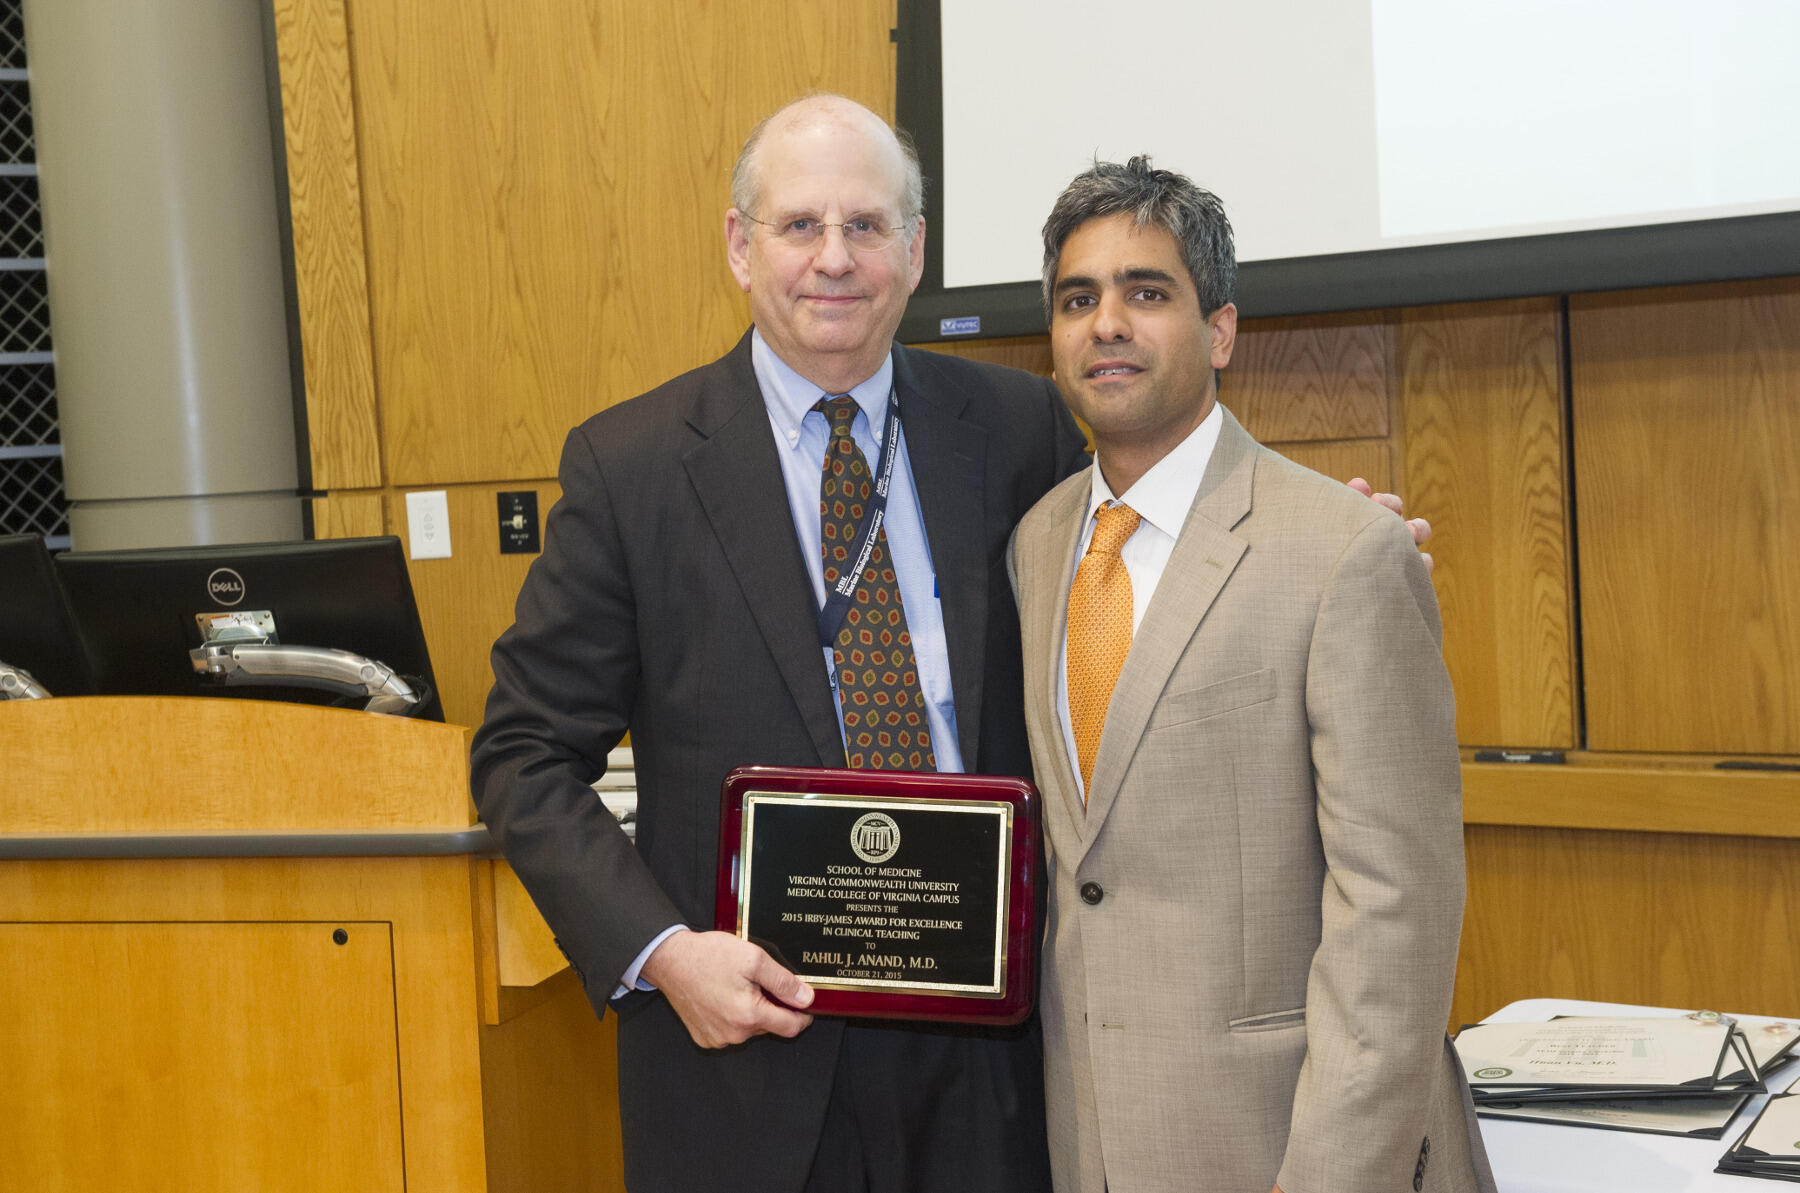 Rahul J. Anand (right), M.D., assistant professor of surgery in the Department of Surgery and program director for the surgery clerkship at the VCU School of Medicine, was one of two recipients to win the Irby-James Award for Excellence in Clinical Teaching. Jerome Strauss (left), M.D., Ph.D., dean of the VCU School of Medicine, presented the award.